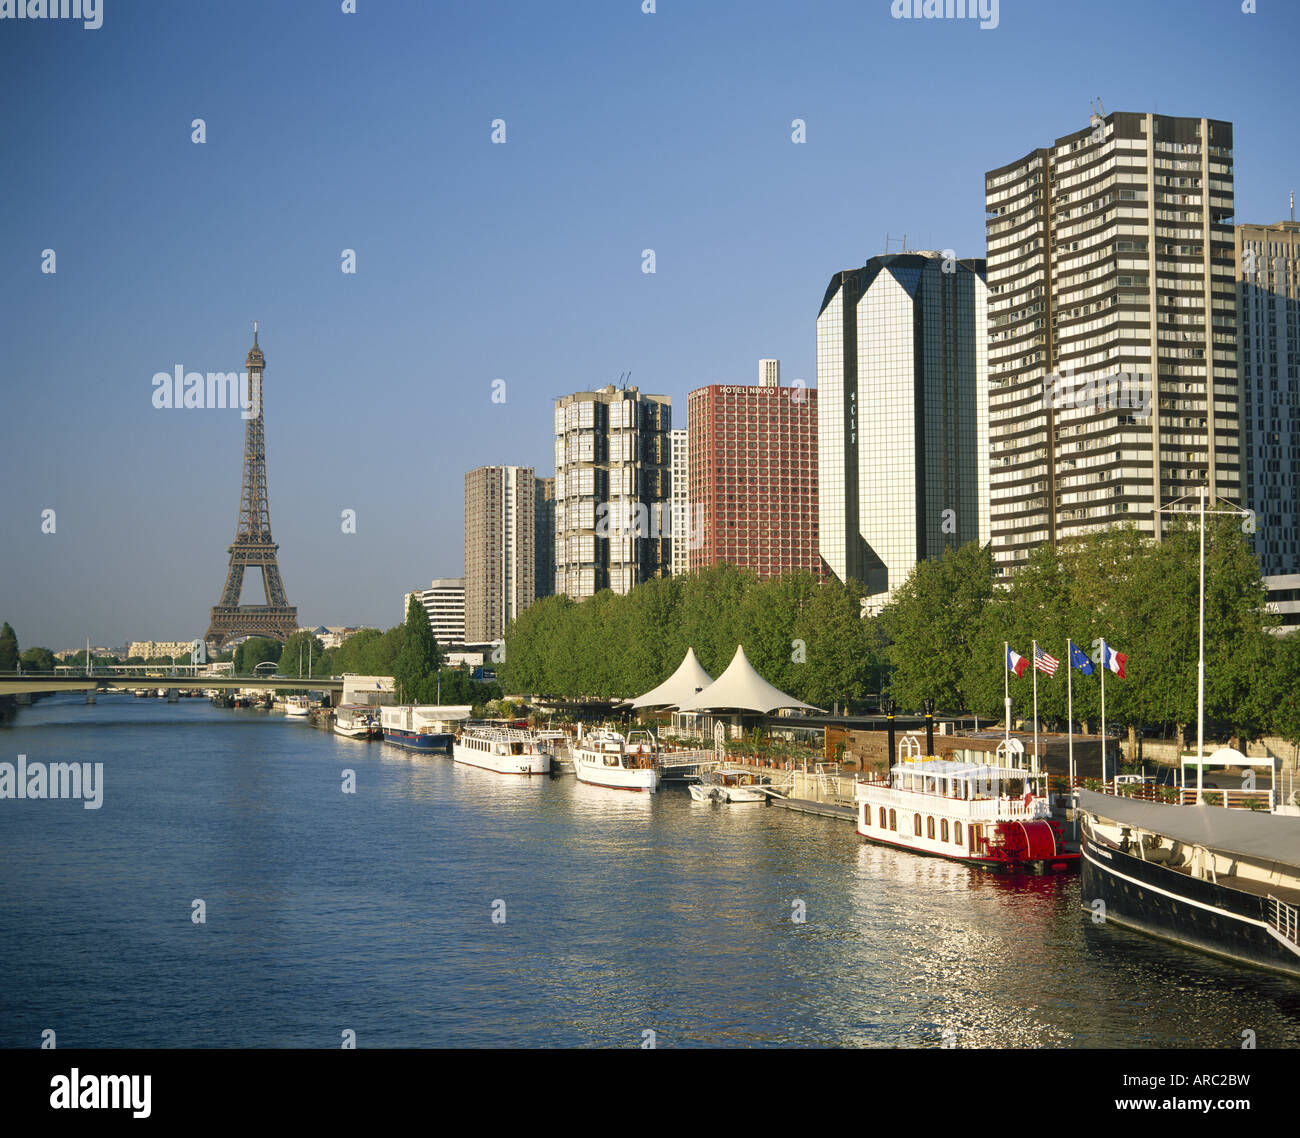 View from the River Seine towards the Beaugrenelle Centre and the Eiffel Tower, Paris, France Stock Photo